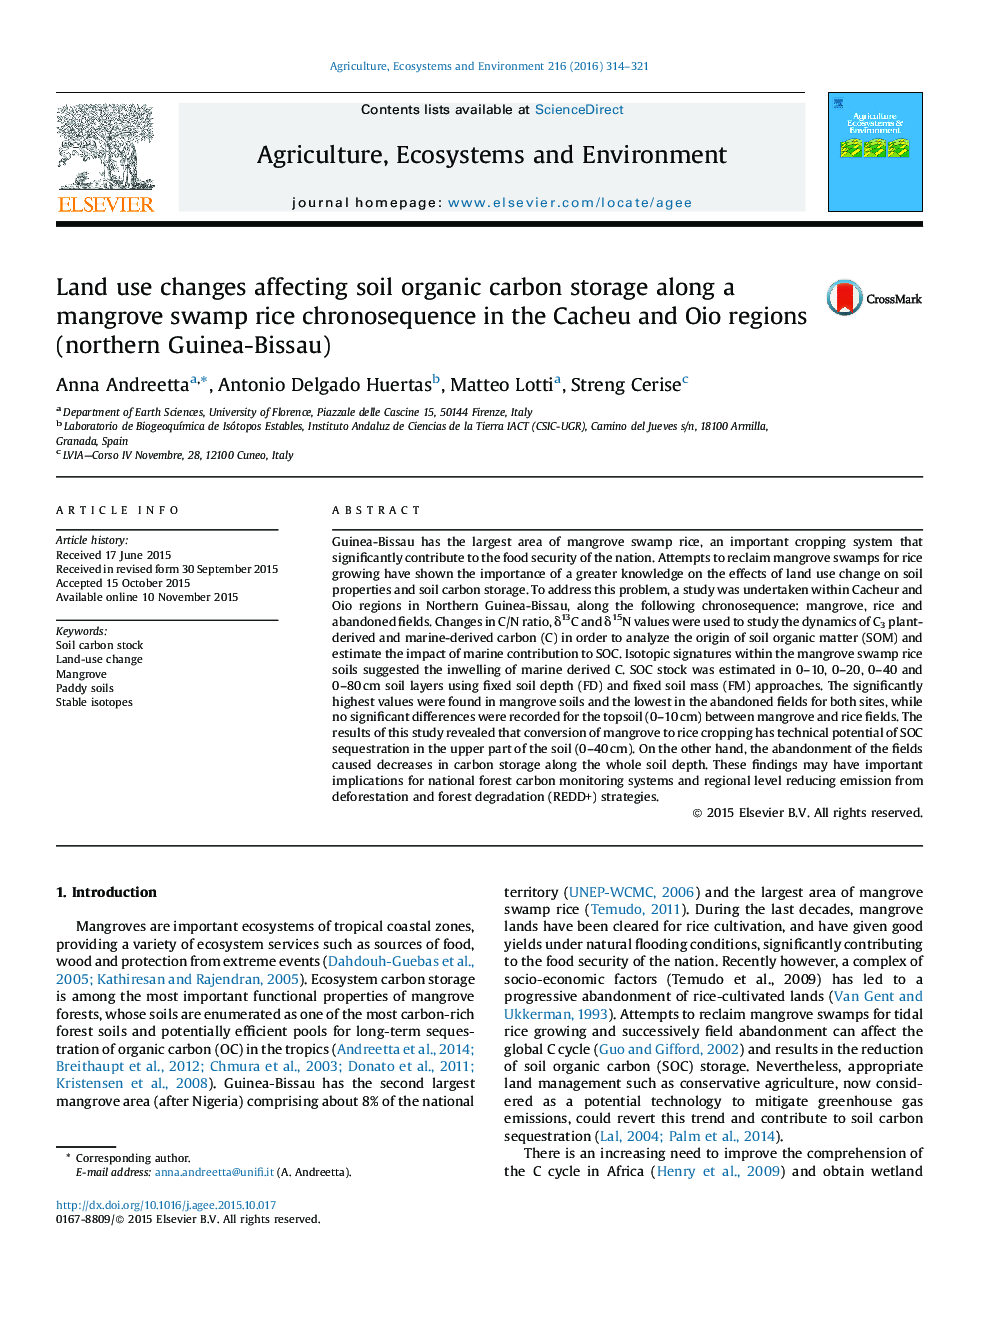 Land use changes affecting soil organic carbon storage along a mangrove swamp rice chronosequence in the Cacheu and Oio regions (northern Guinea-Bissau)